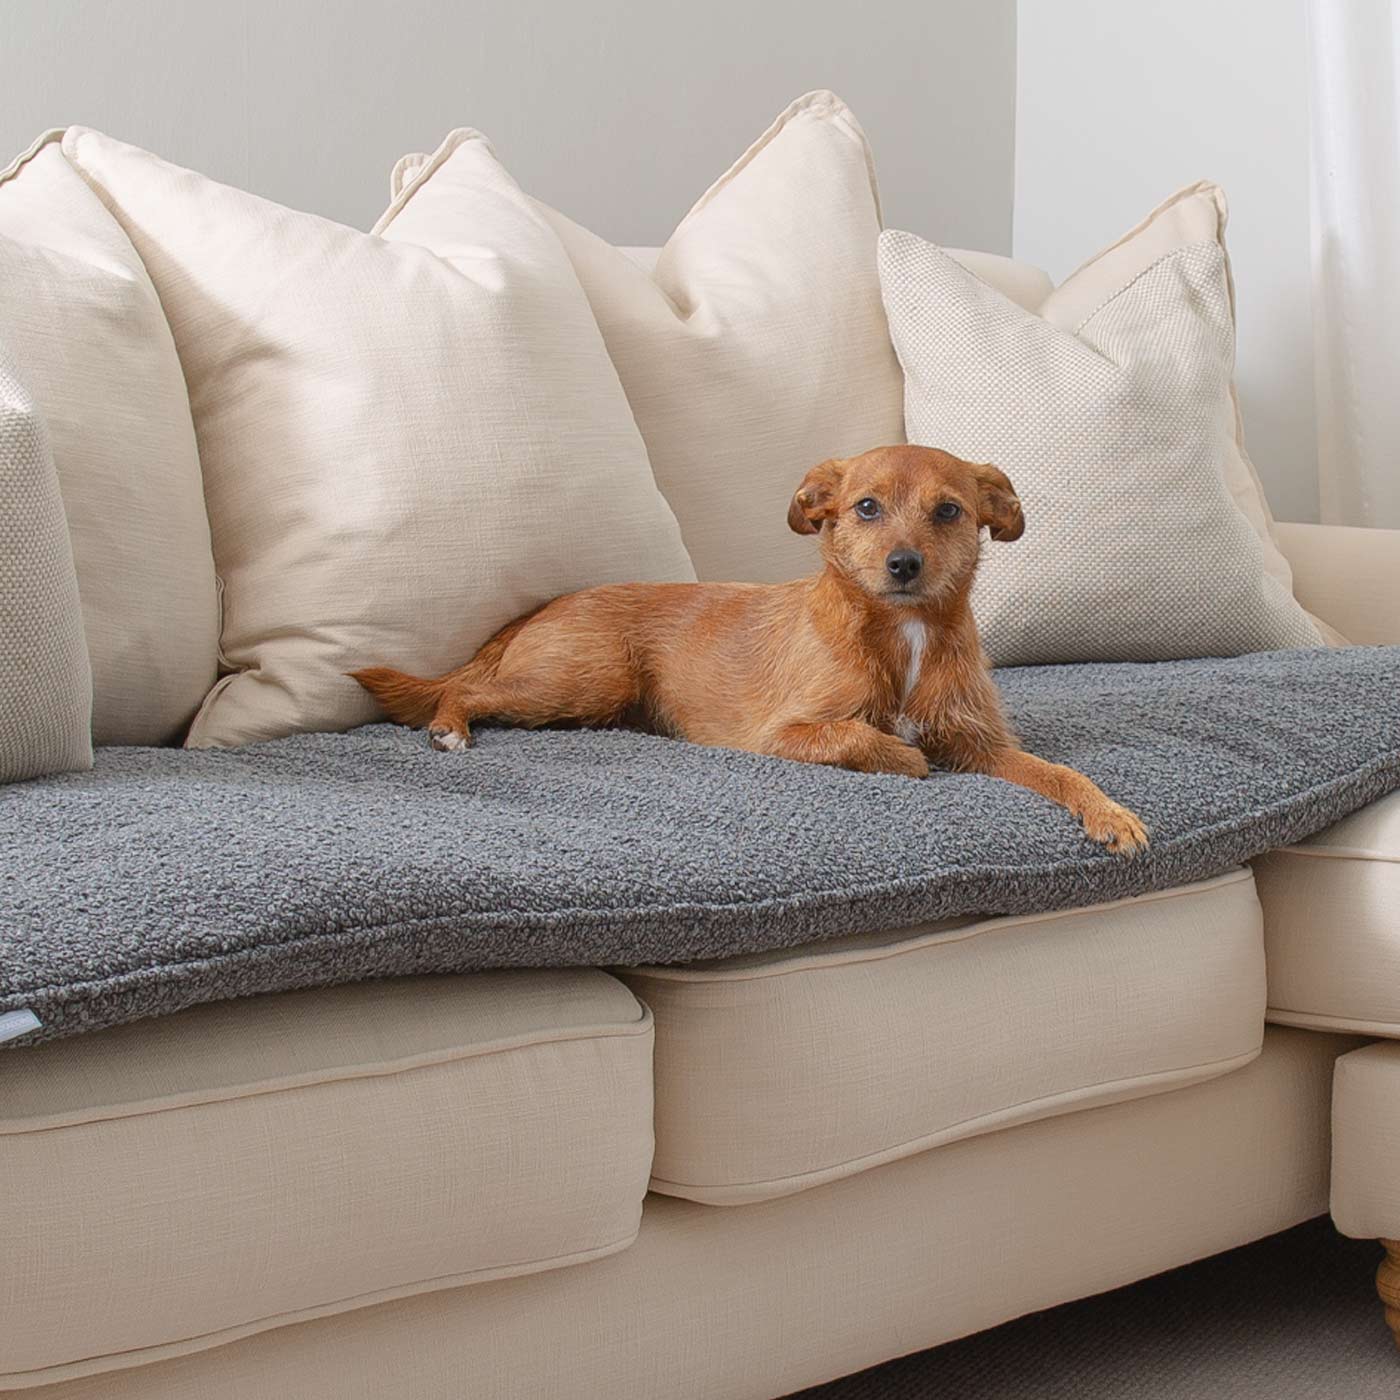 Discover Our Luxury Boucle Couch Topper, The Perfect Pet couch Accessory In Stunning Granite! Available Now at Lords & Labradors US